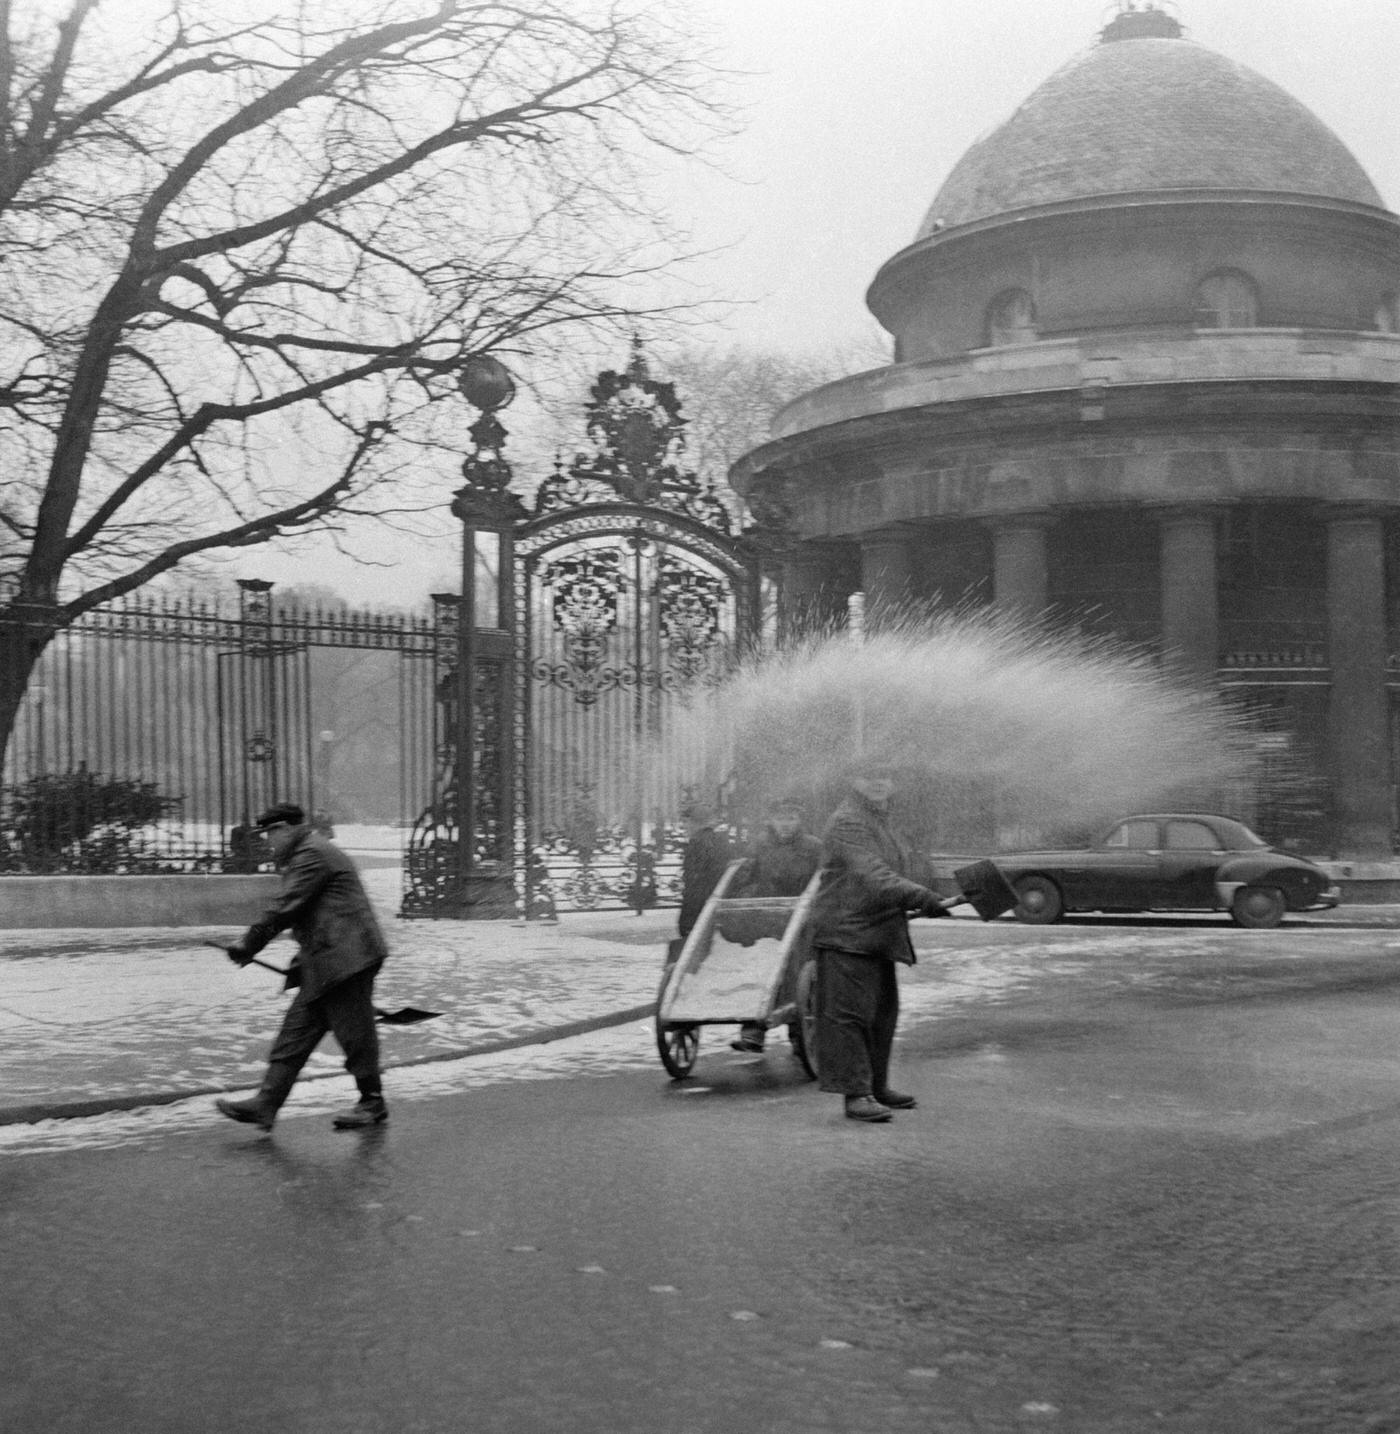 City Workers Spreading Salt To Melt The Snow, Paris, February 23, 1956.